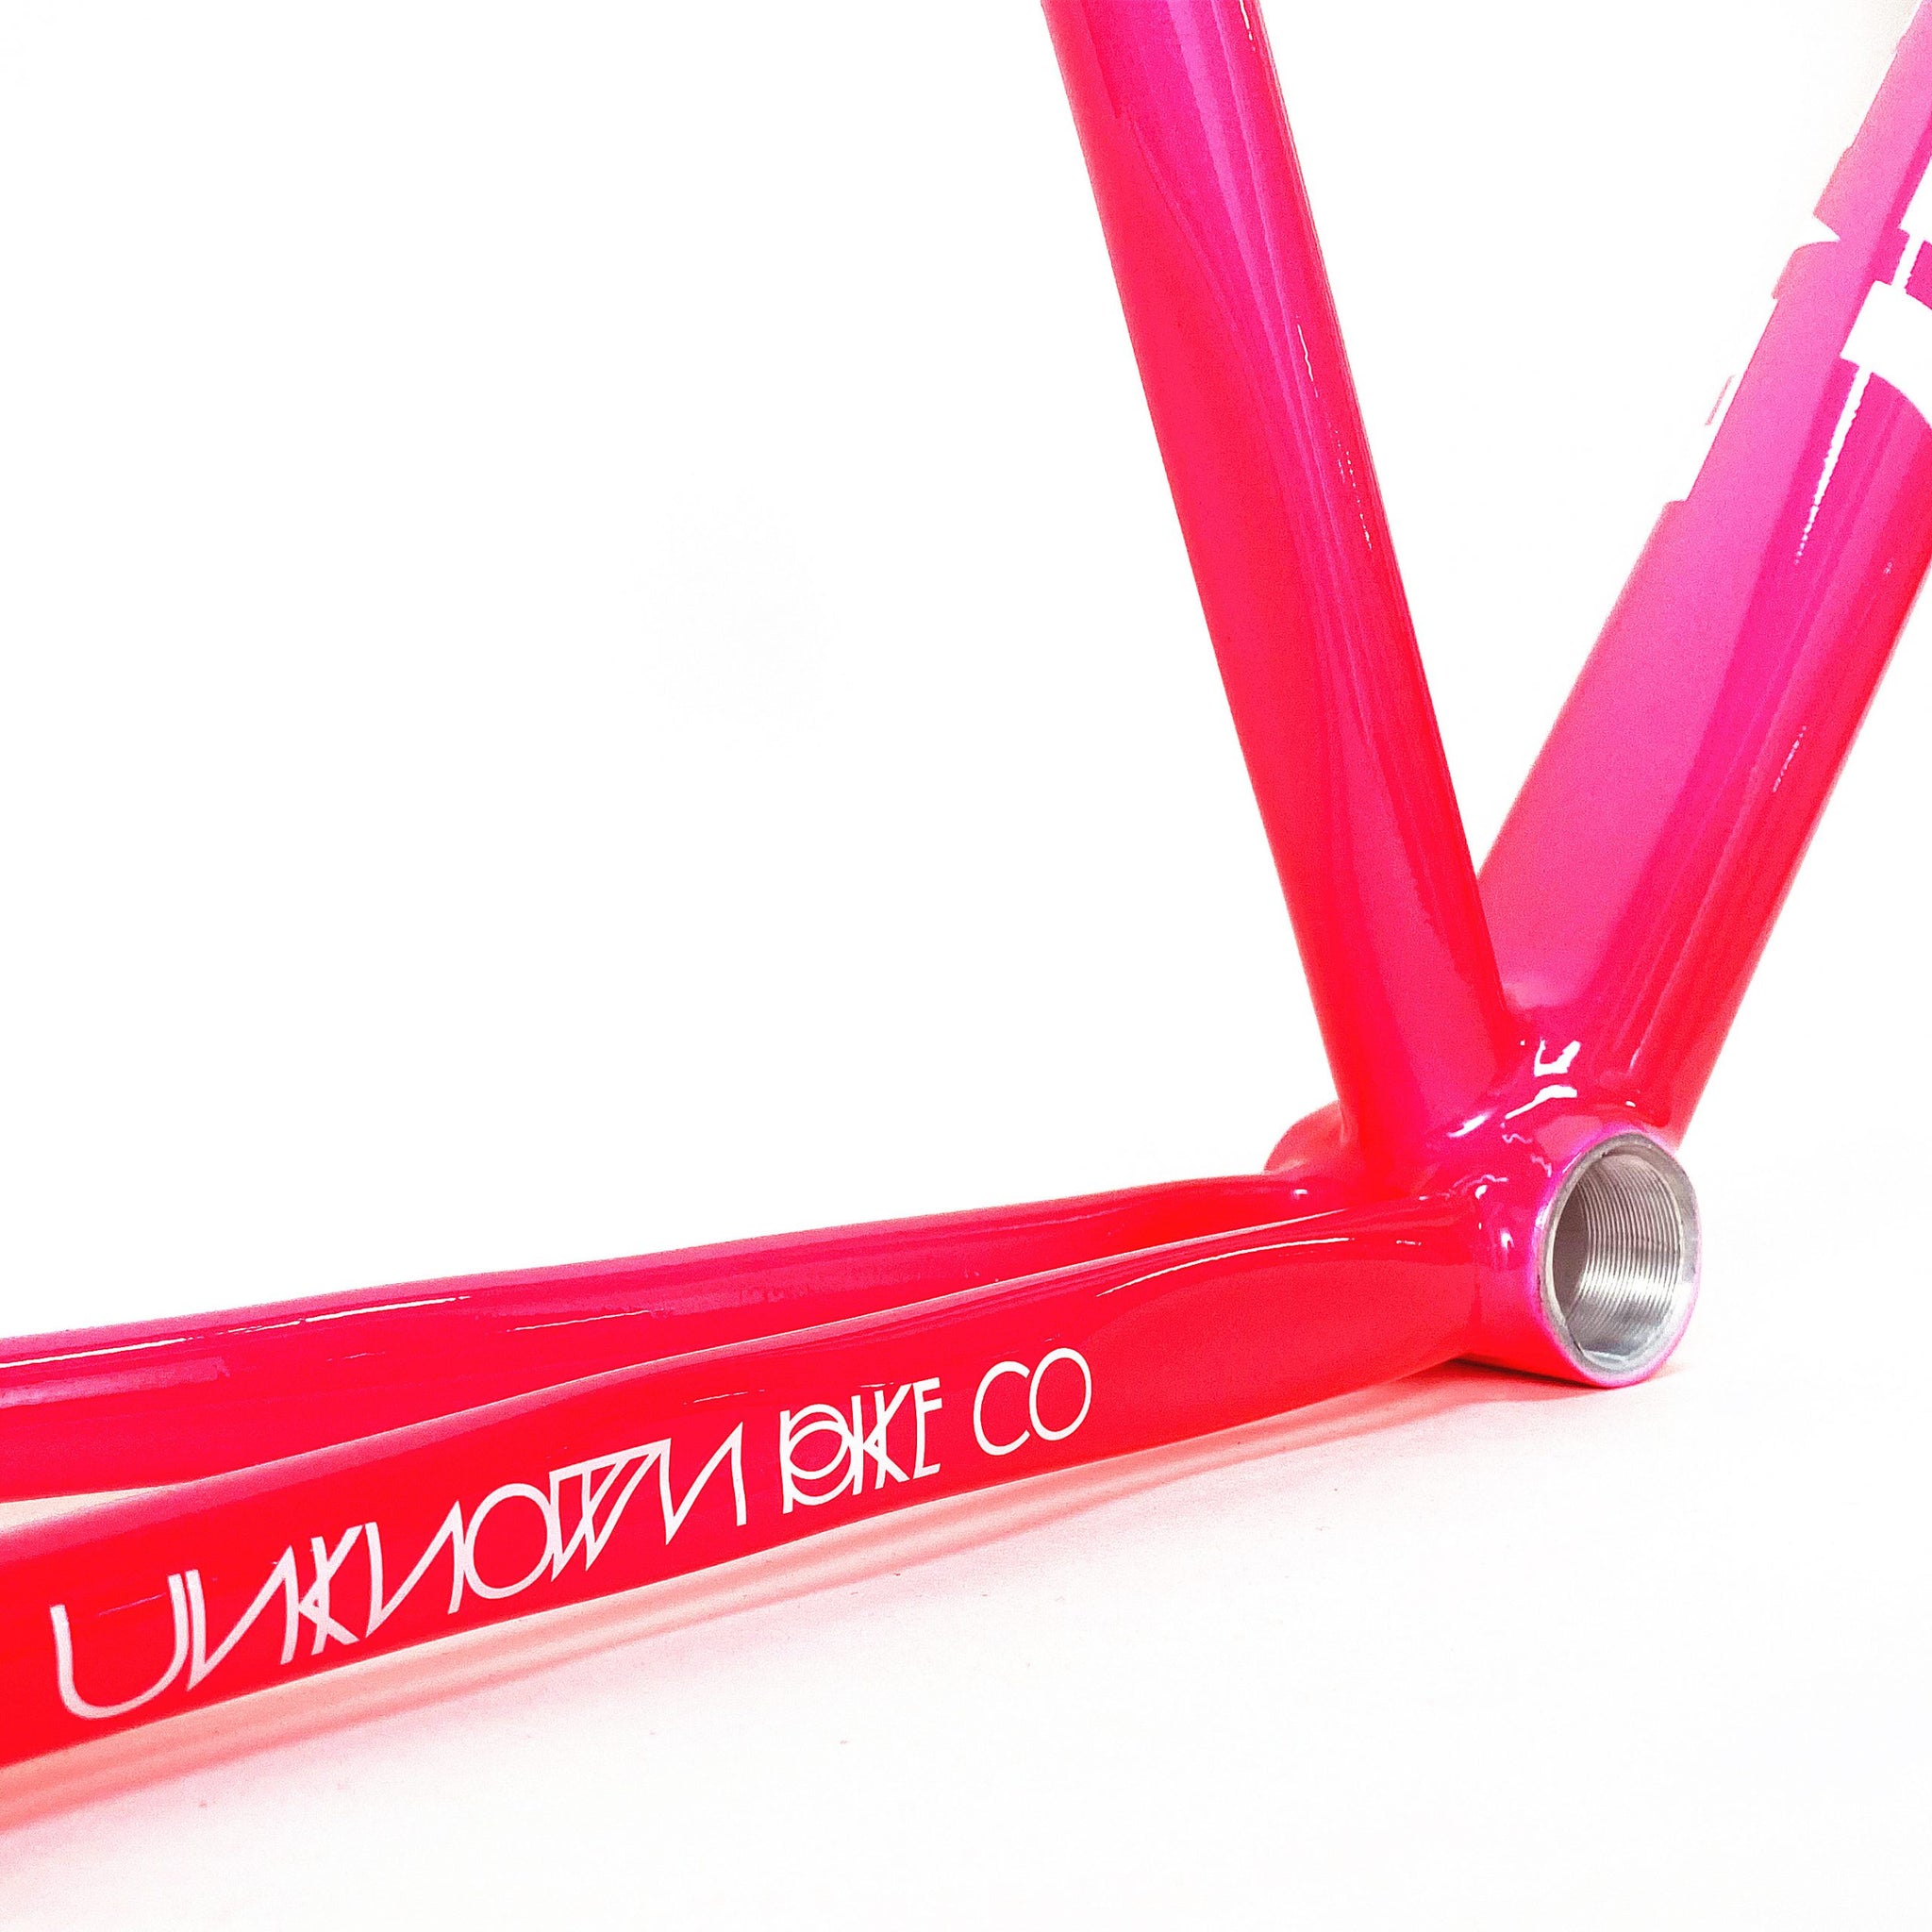 Unknown PS1 Candy Red Bicycle Frames 549.99 Atelier Olympia